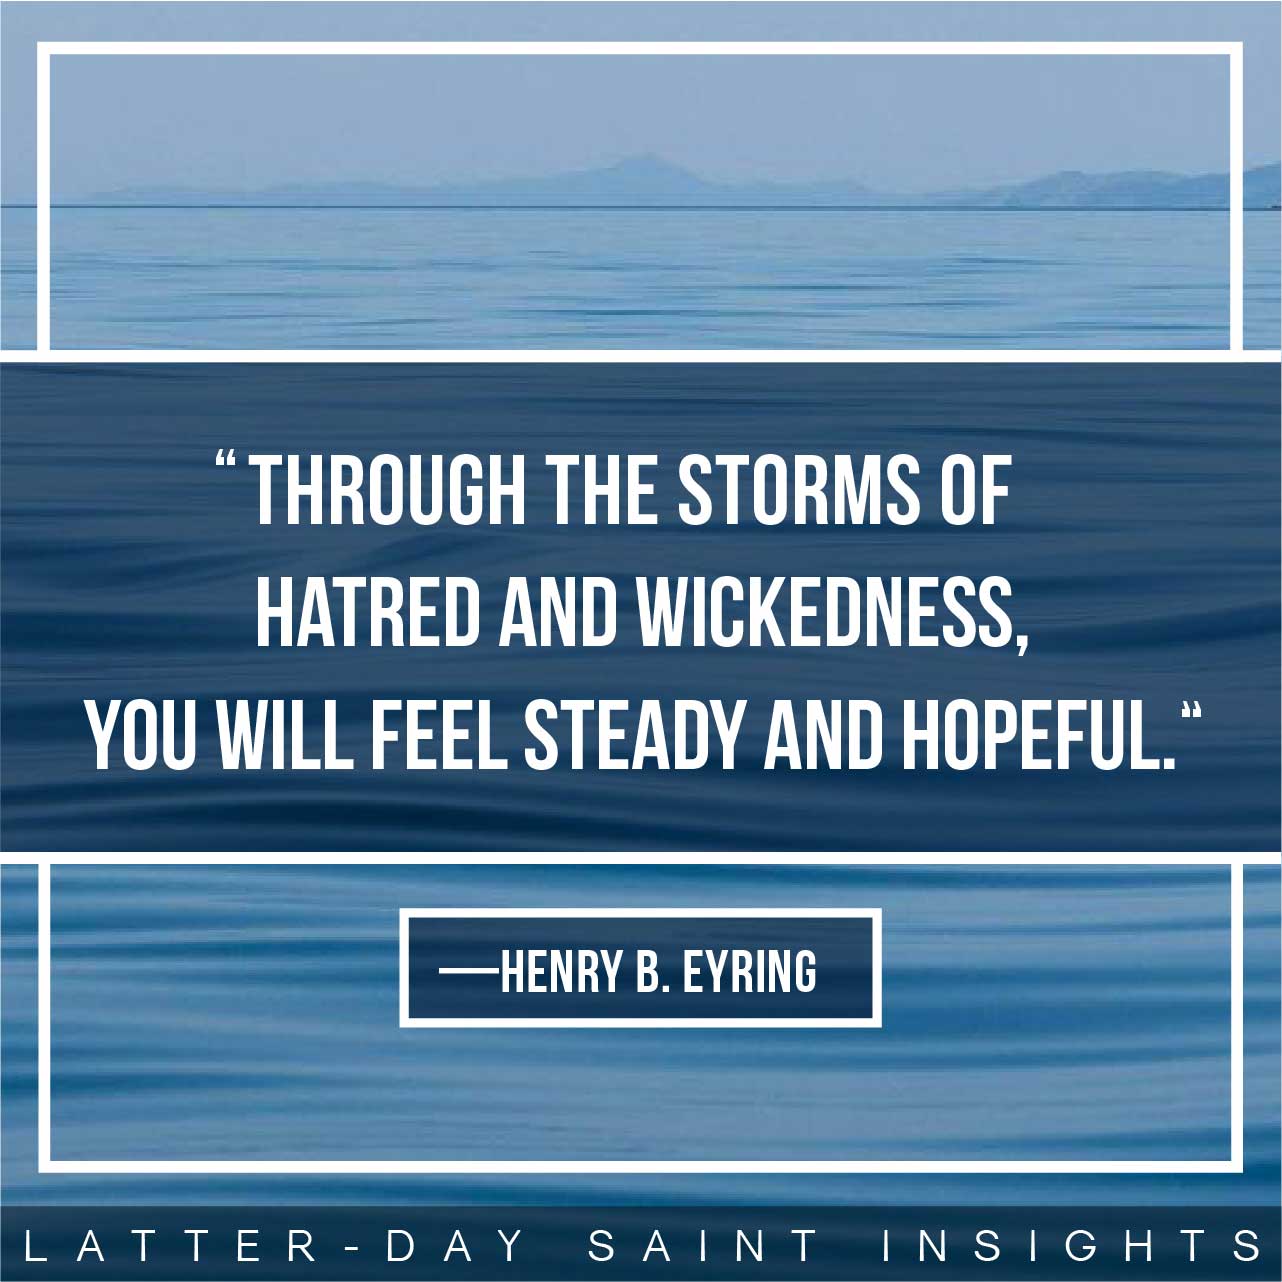 “Faith will lead you to daily repentance and consistent covenant keeping. Then you will always remember Him. And through the storms of hatred and wickedness, you will feel steady and hopeful.” By Henry B. Eyring